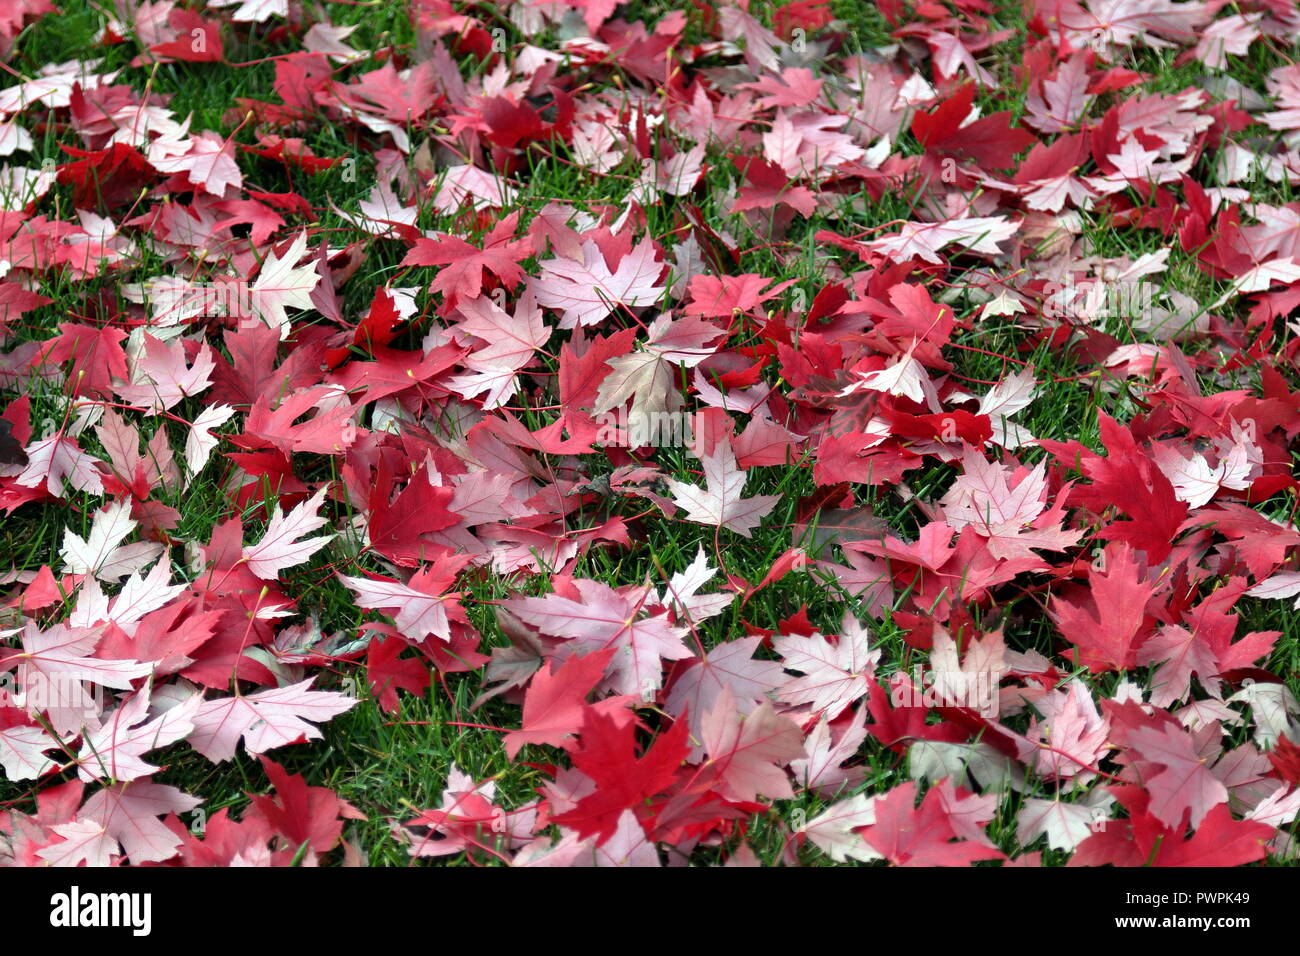 Natural background with dried red maple leaves on green grass. Selective focus. Stock Photo